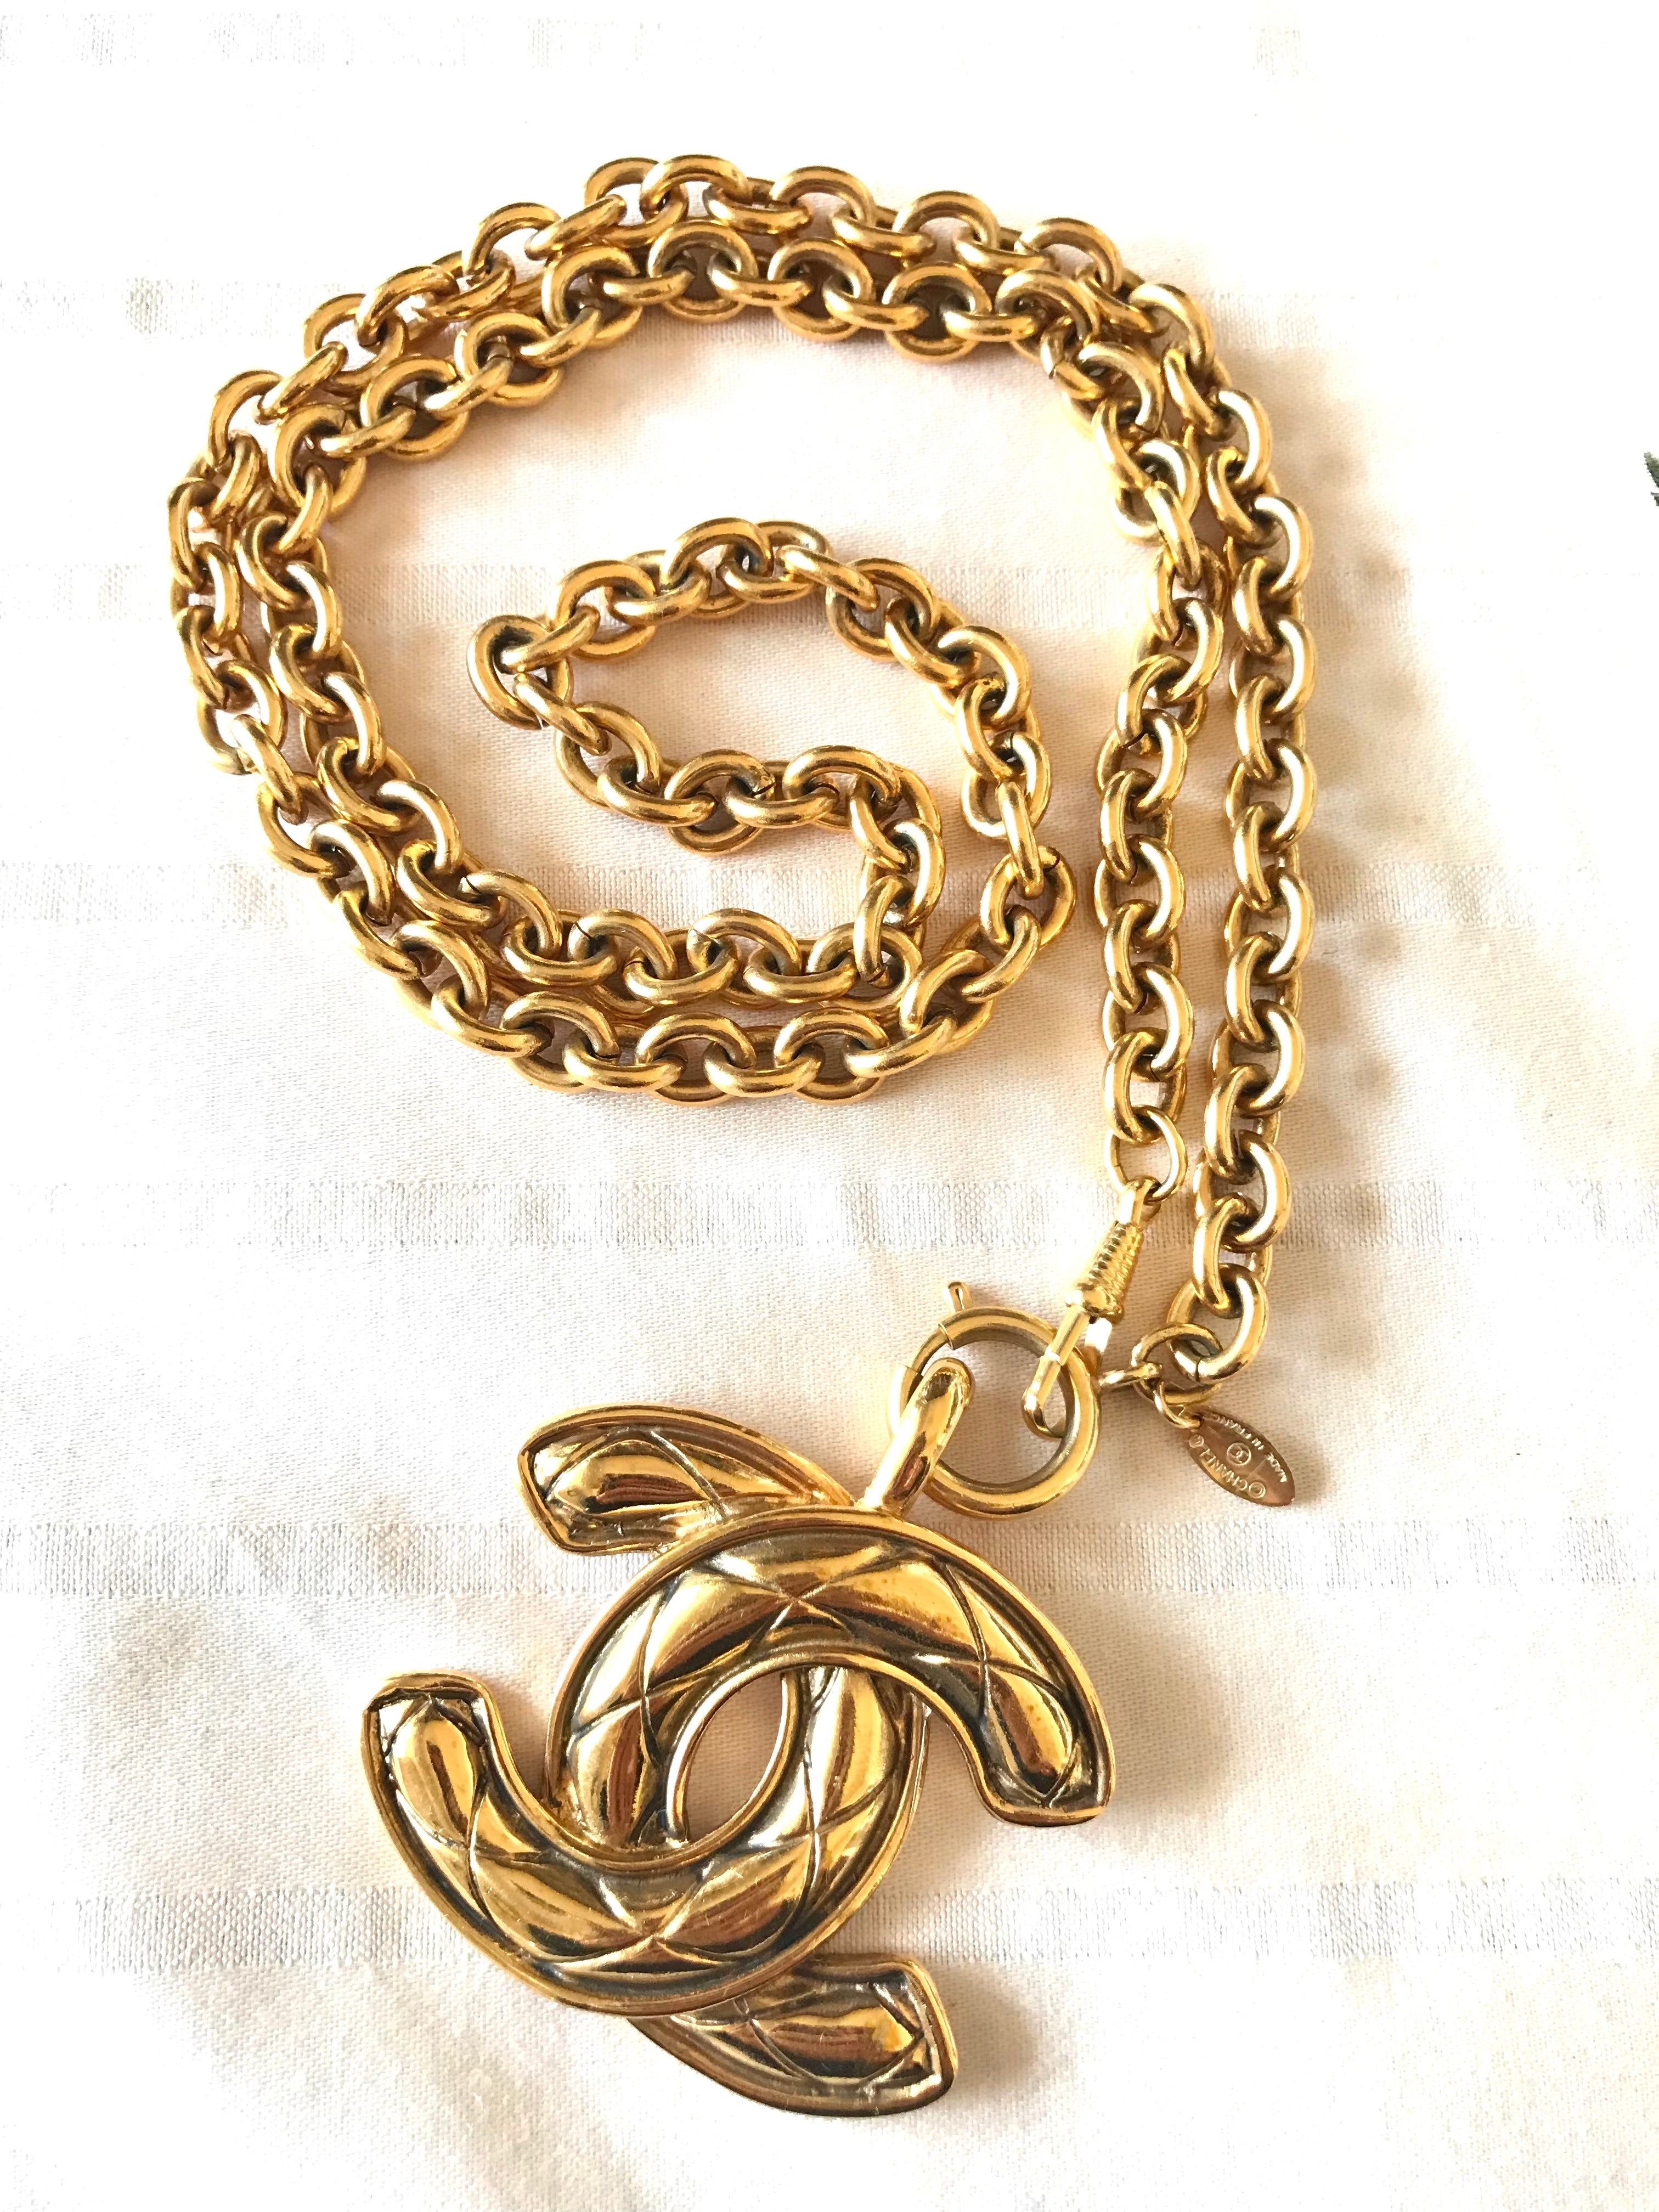 Discover a Chanel Bracelet in Iconic Brand Motifs, Handbags and  Accessories